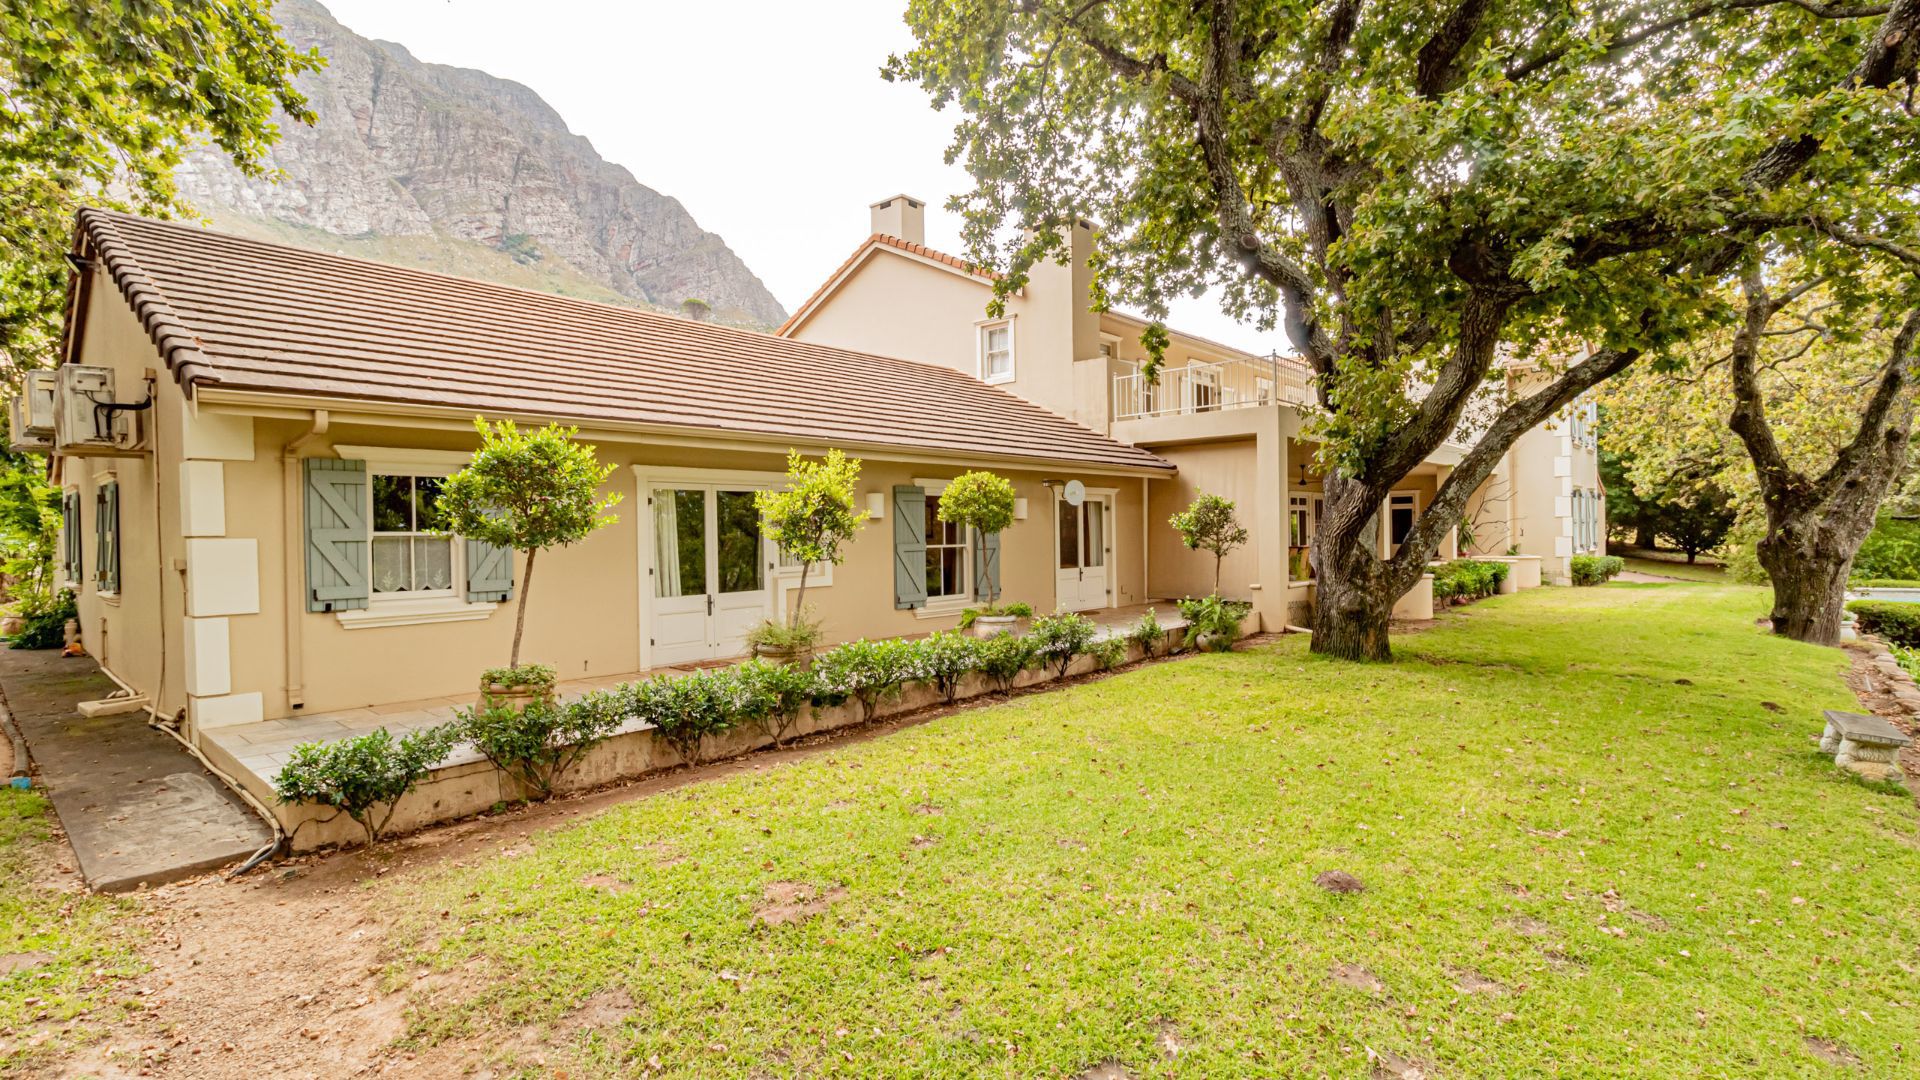 Land in Tulbagh - Image-029.jpg